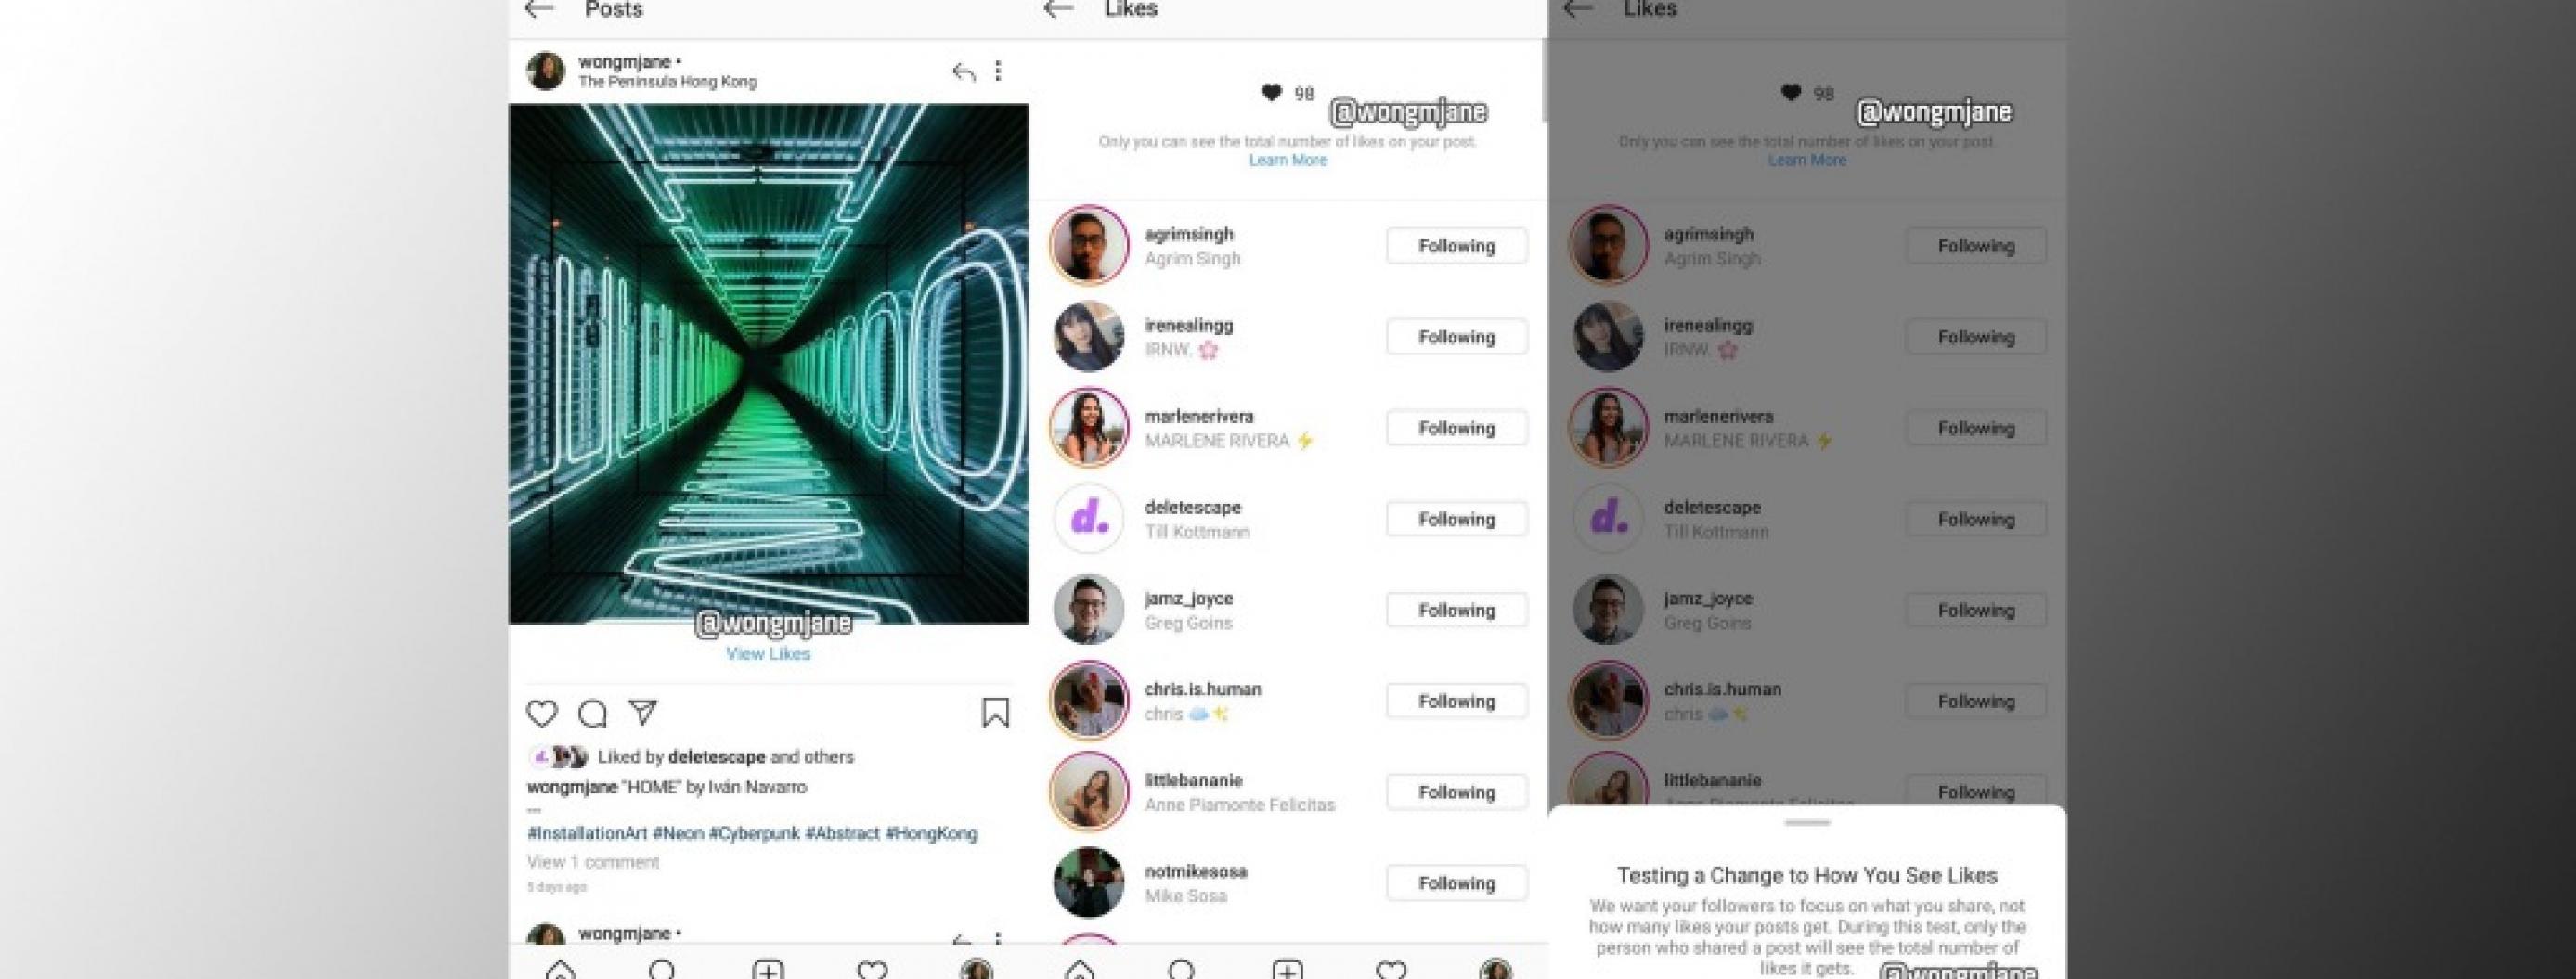 Instagram Could Decide to Hide the Number of Post Likes